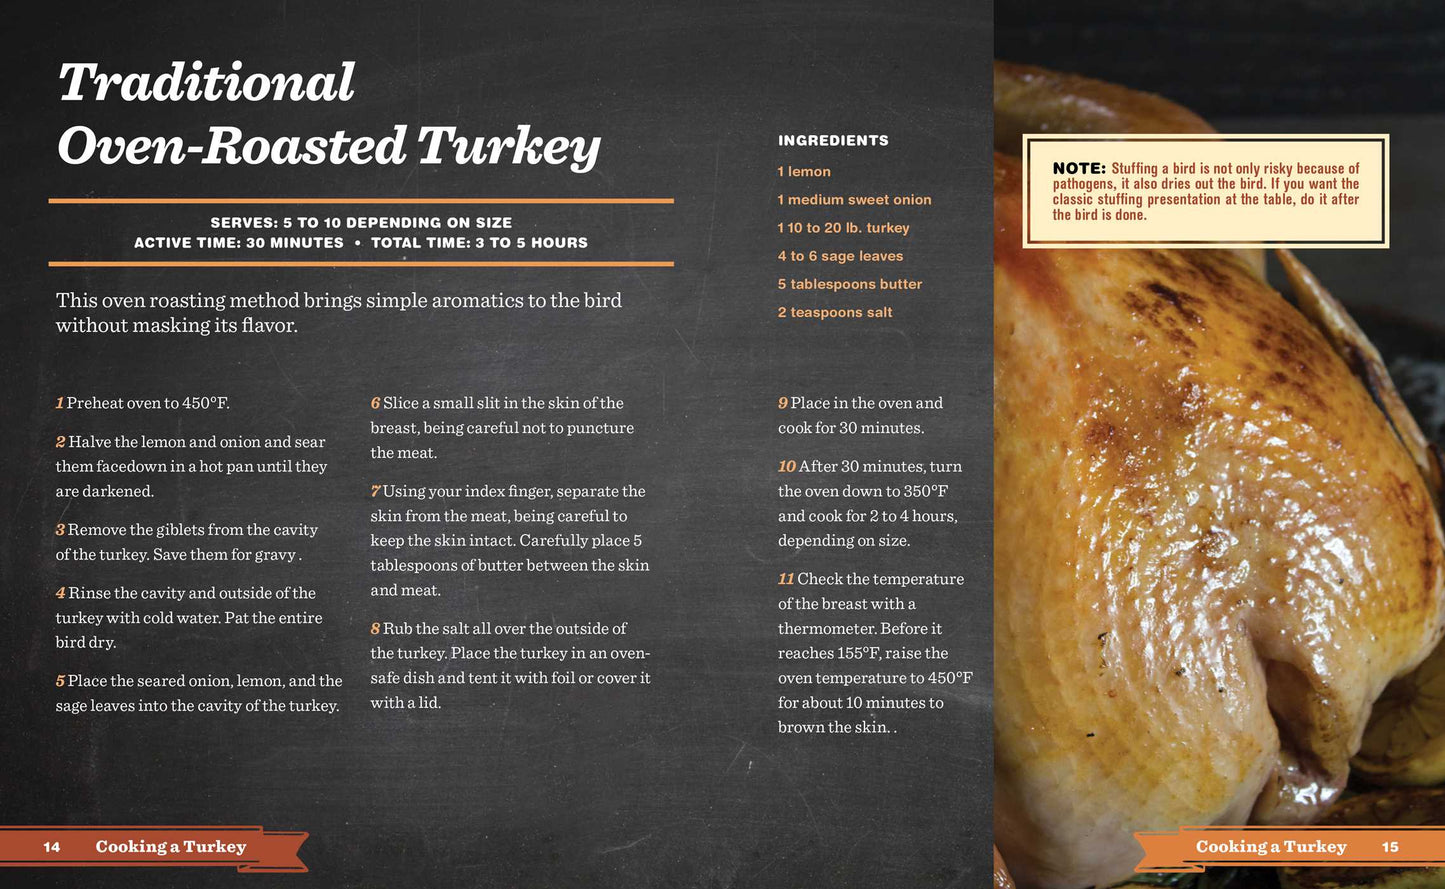 Perfect Turkey Cookbook: More Than 100 Mouthwatering Recipes for the Ultimate Feast